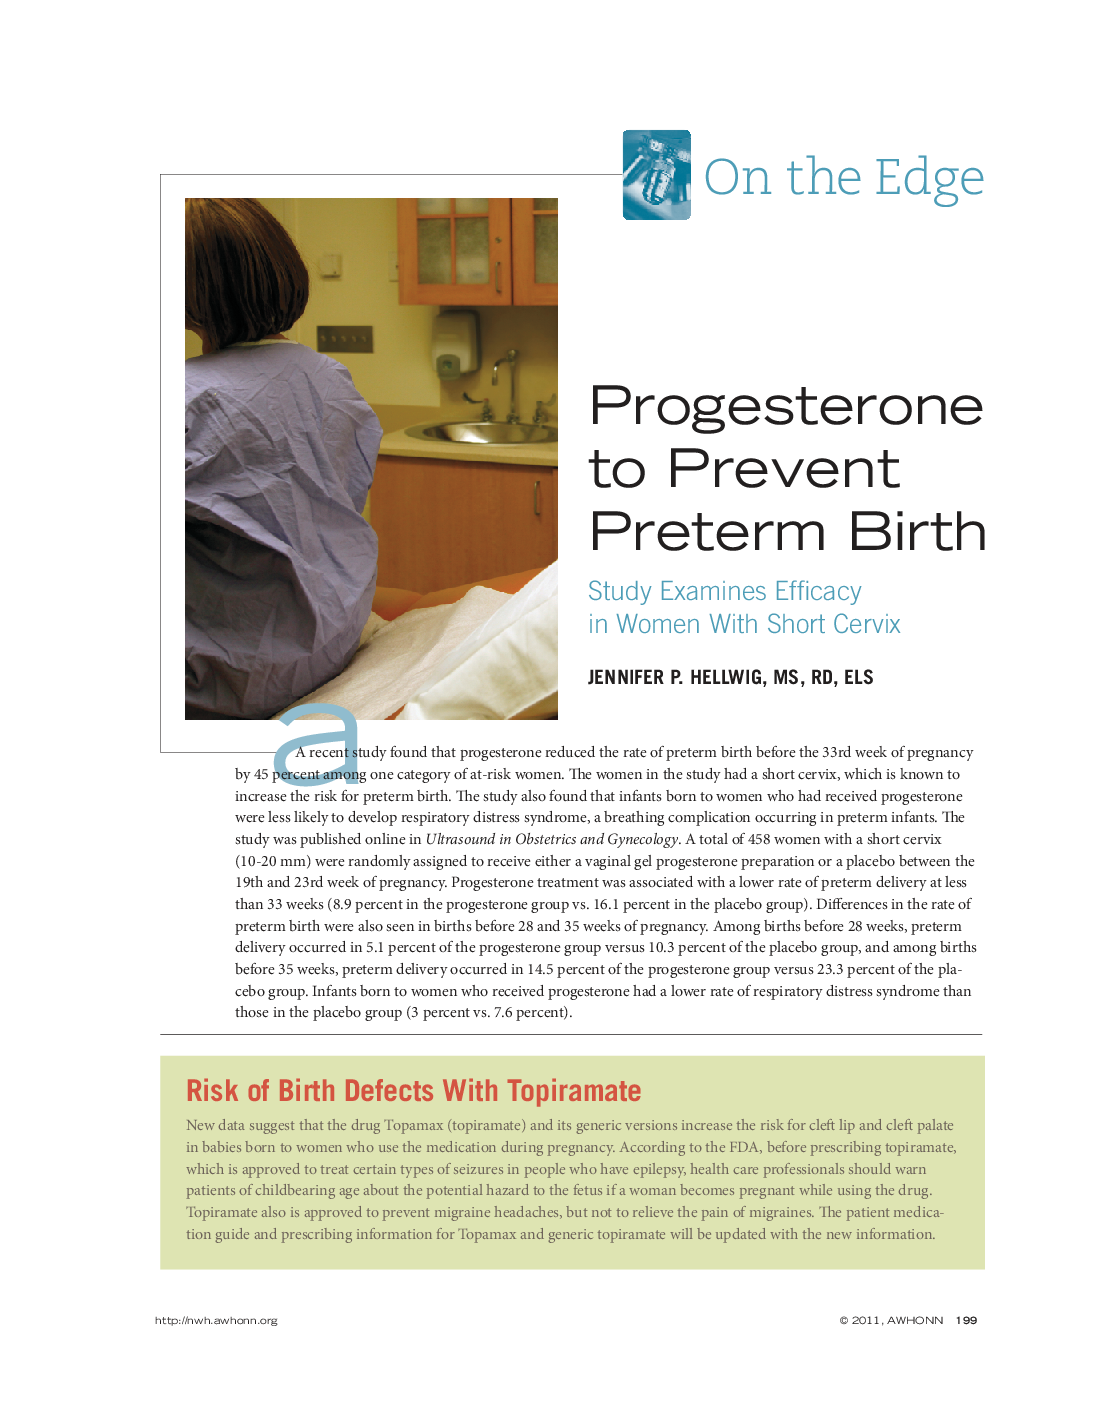 Progesterone to Prevent Preterm Birth: Study Examines Effi cacy in Women With Short Cervix